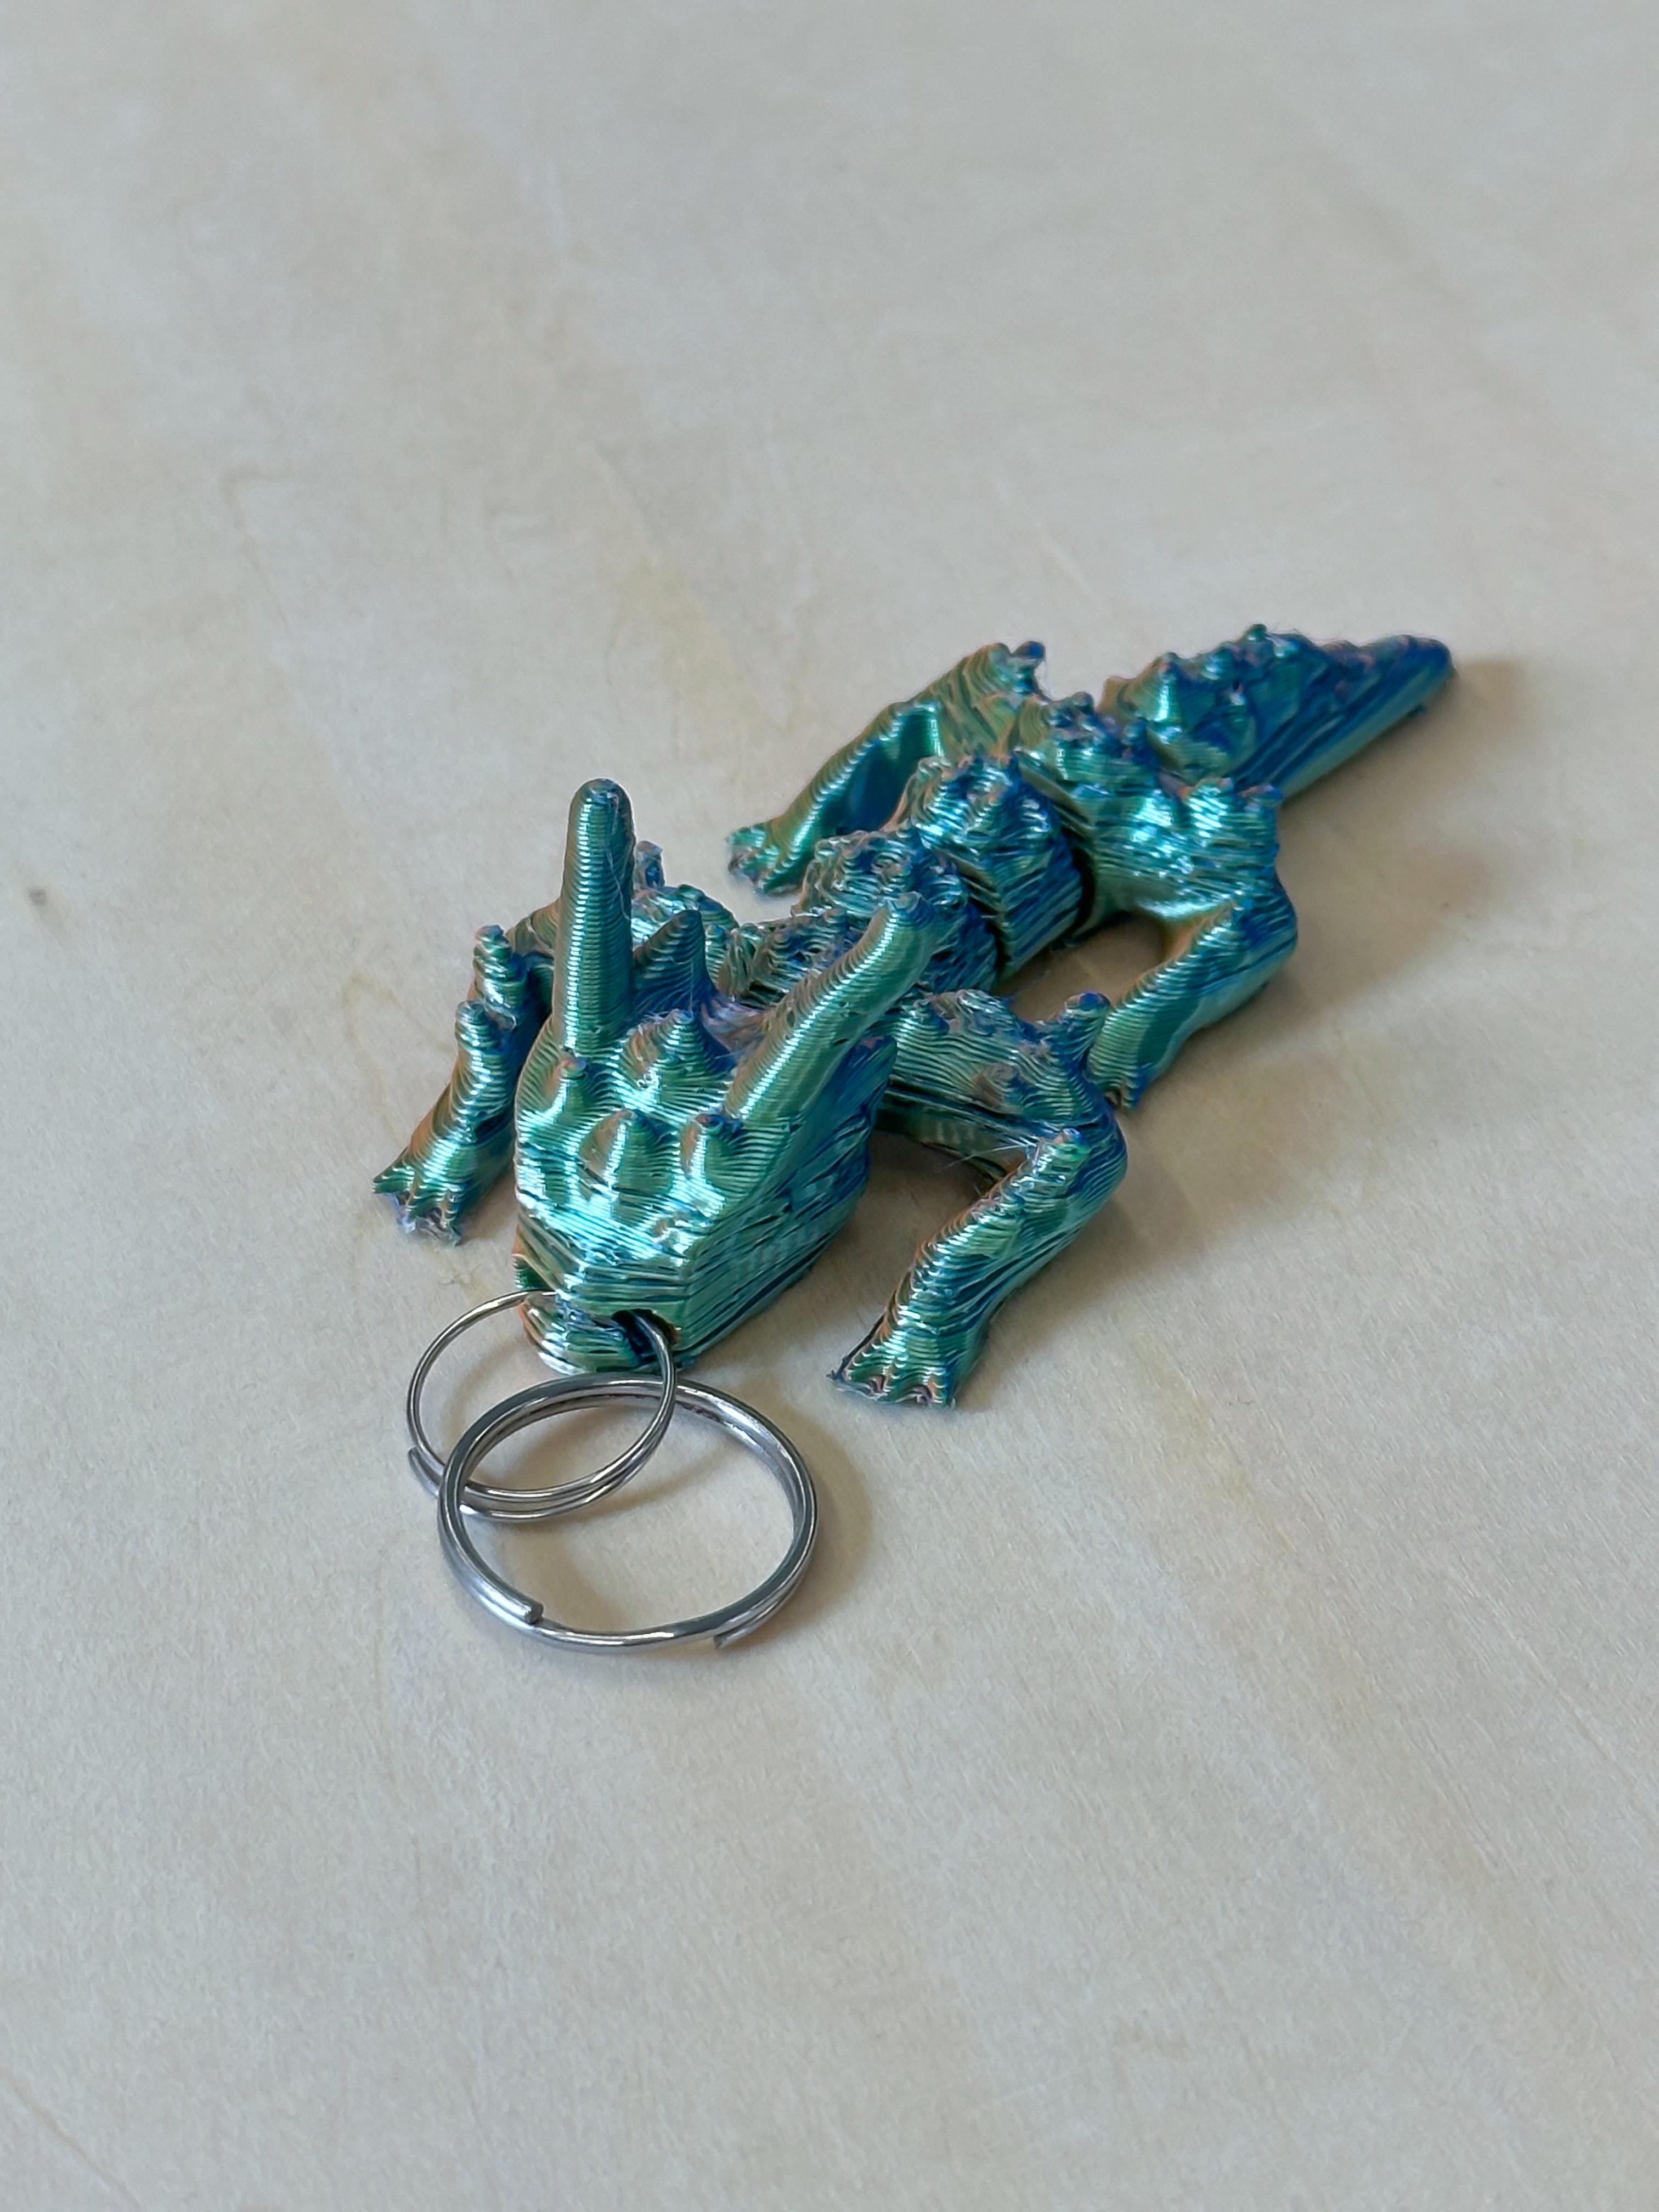 3D Flexi Dragon Keychain(Limited Time Free) 3d model